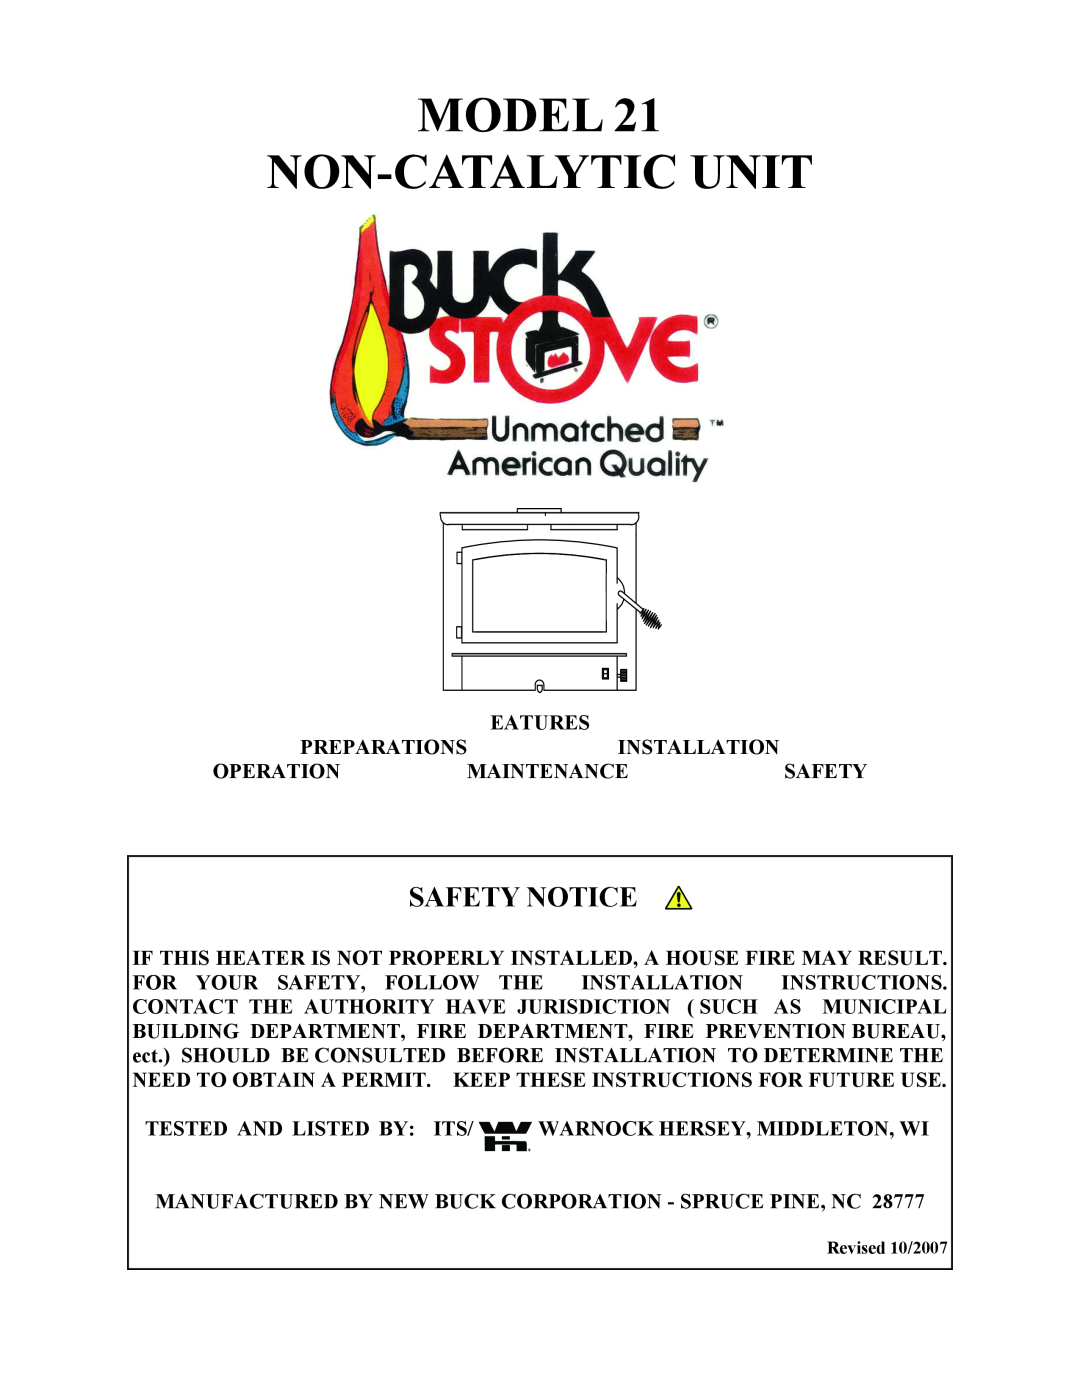 New Buck Corporation 21 installation instructions Model Non-Catalyticunit, Buck Stove 